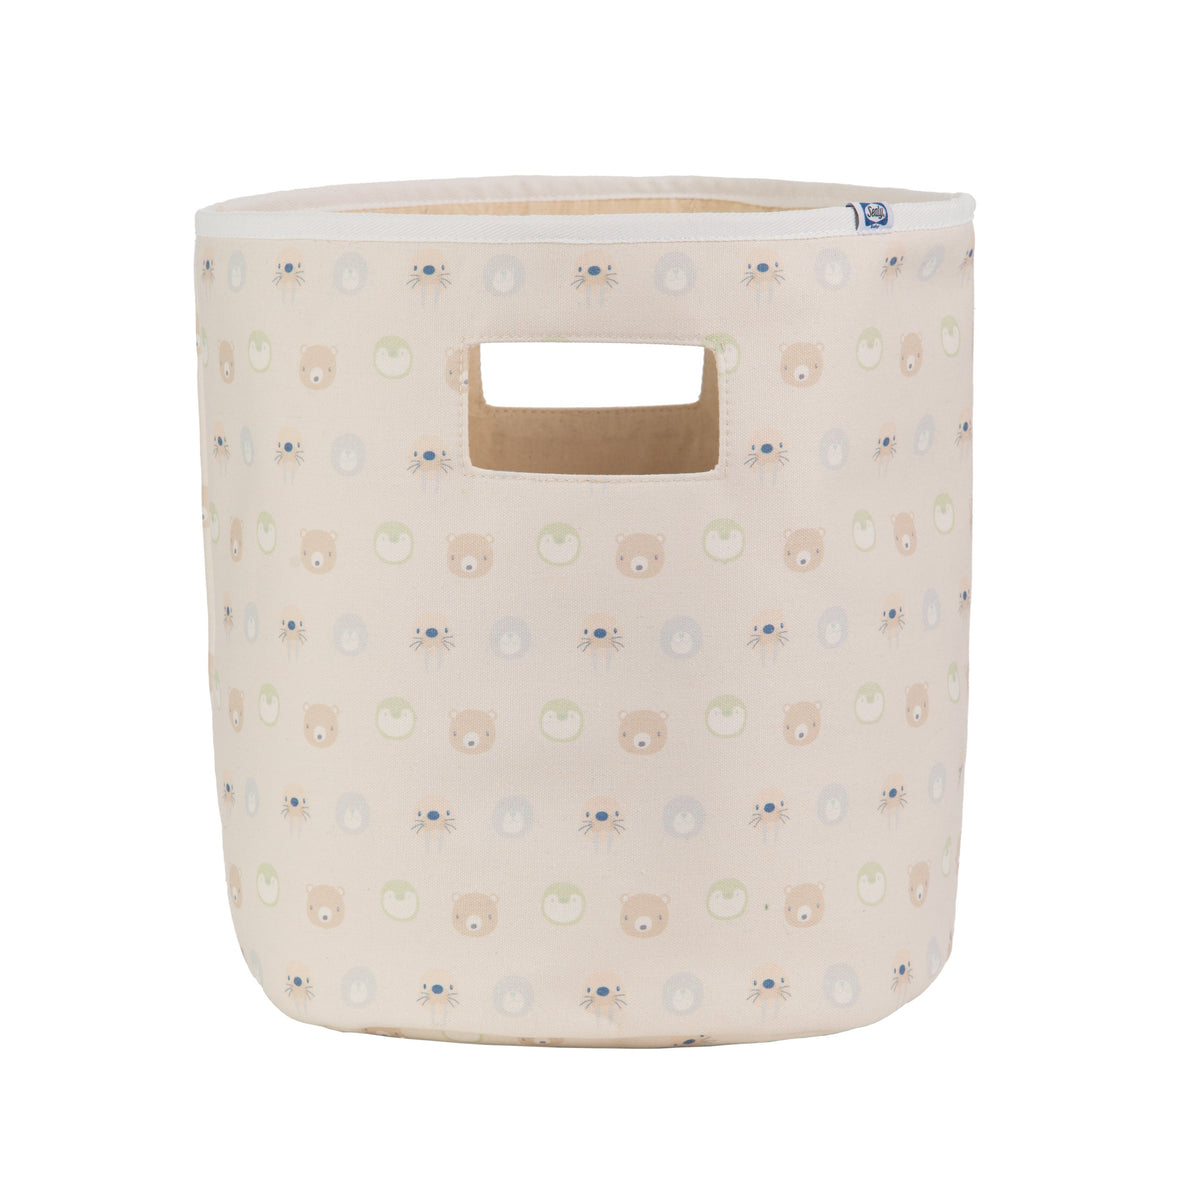 Sealy Baby Soft Storage - Beige Animal Faces